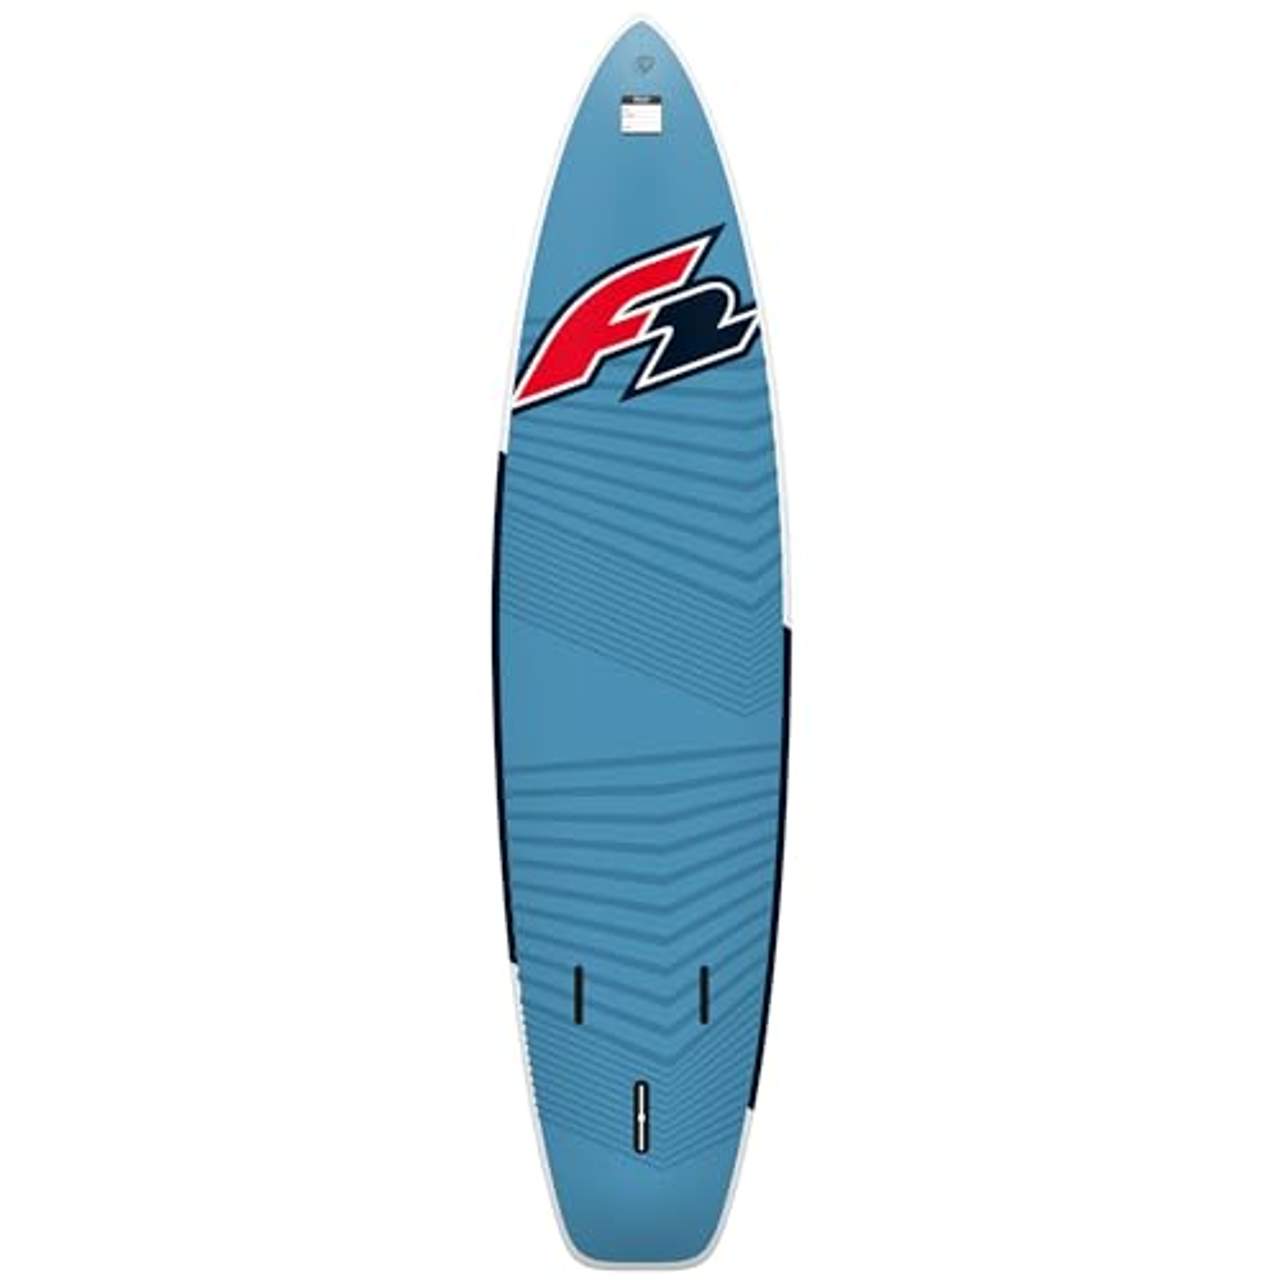 Campsup SUP F2 Impact 10'8" Turquoise Aufblasbares Stand Up Paddle Board